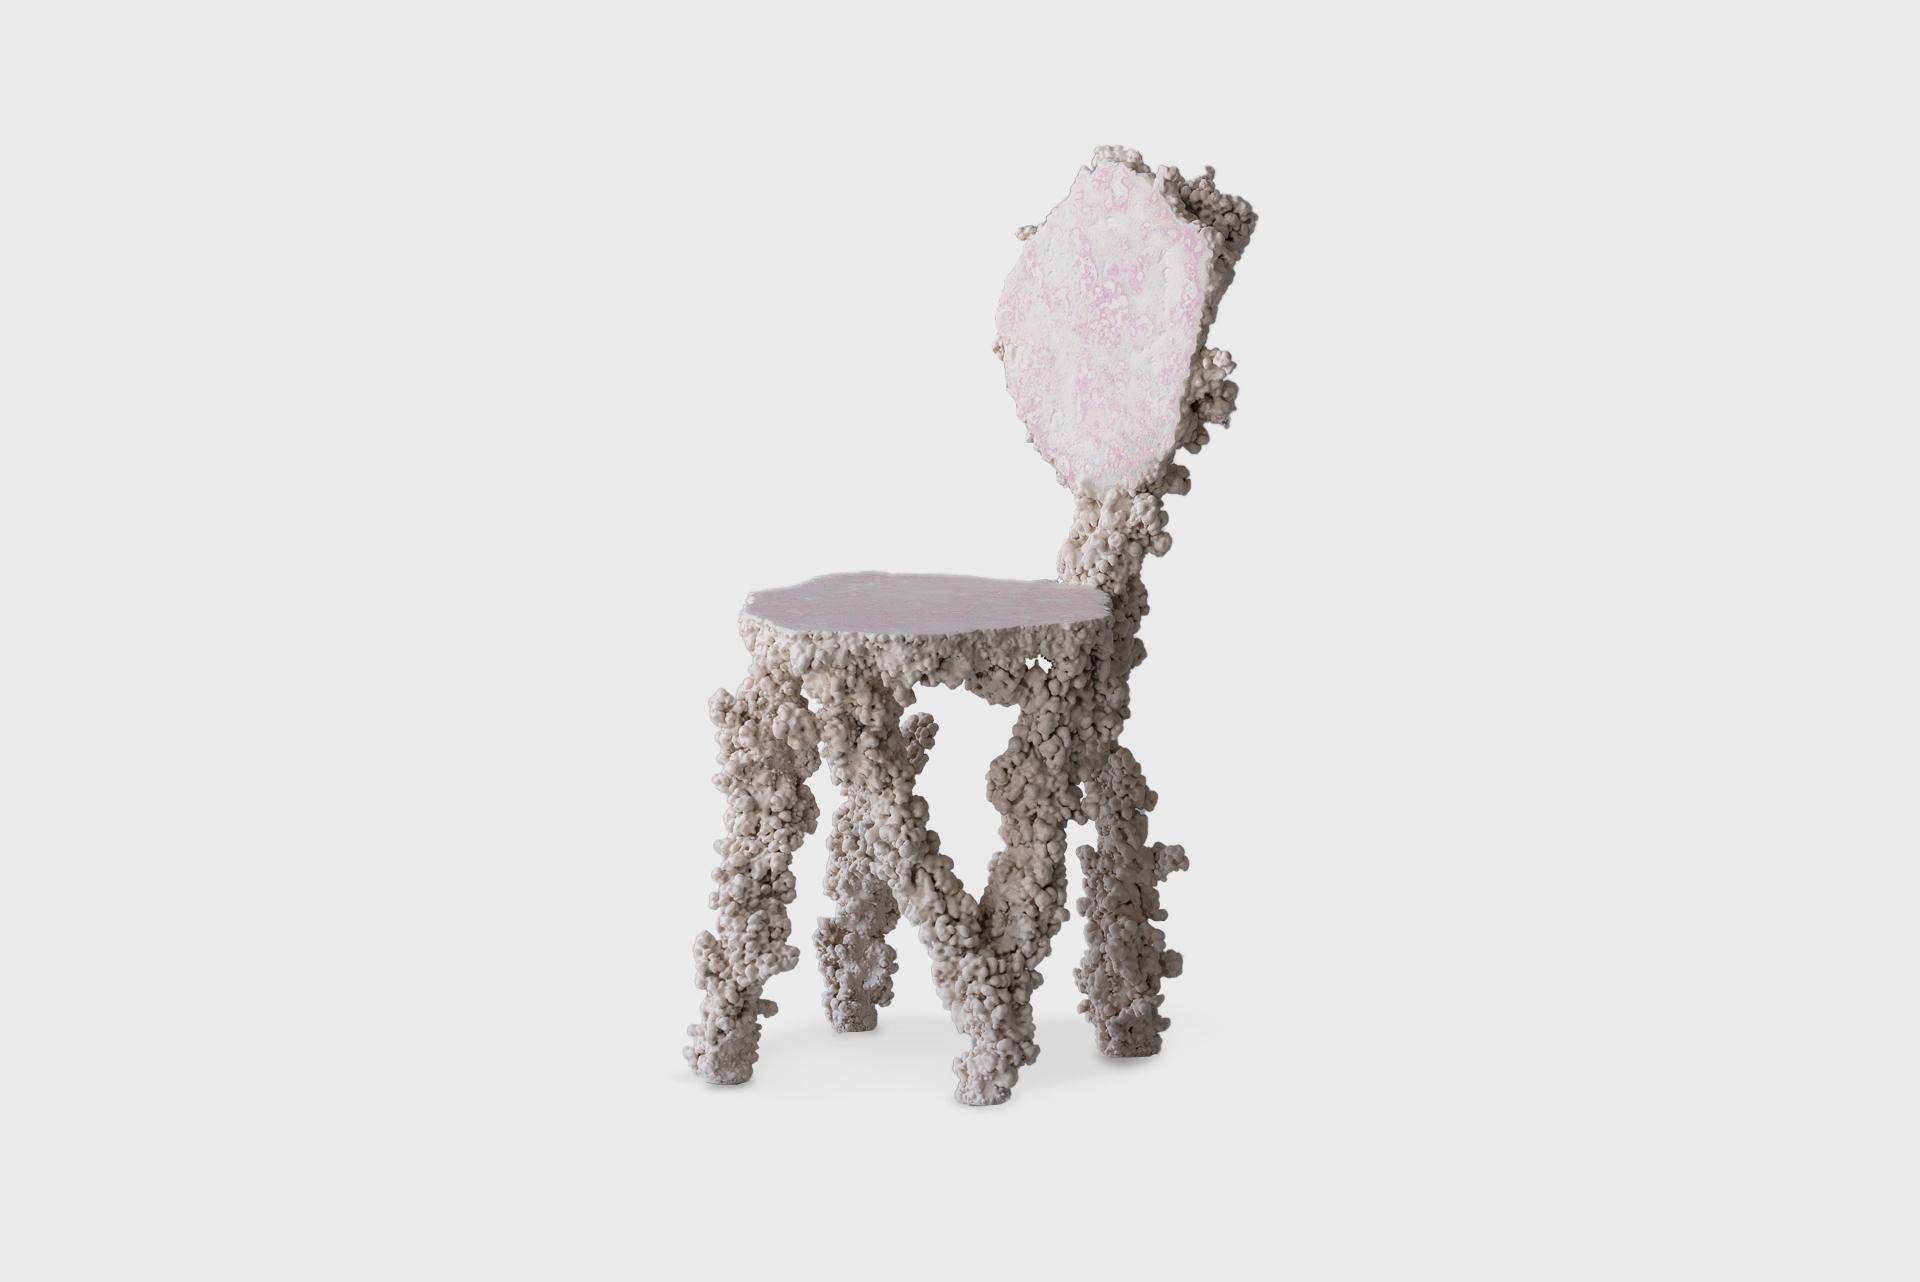 Contemporary Chair Epimorph, Recycled Aluminium, Resin, Mineral, Elissa Lacoste For Sale 2